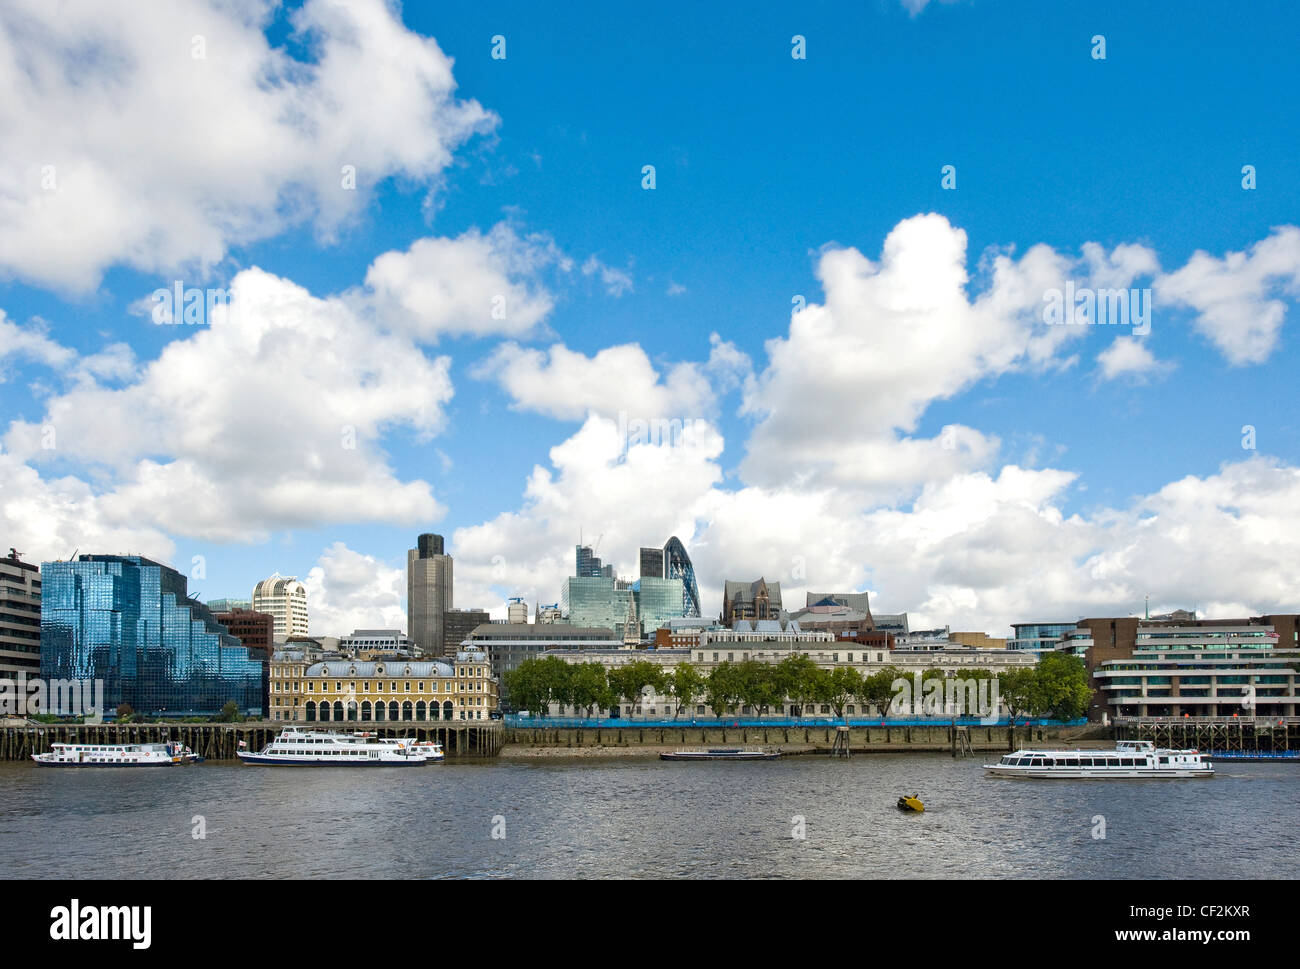 A sightseeing cruise boat travelling along the River Thames past some iconic London landmarks on the City of London skyline. Stock Photo